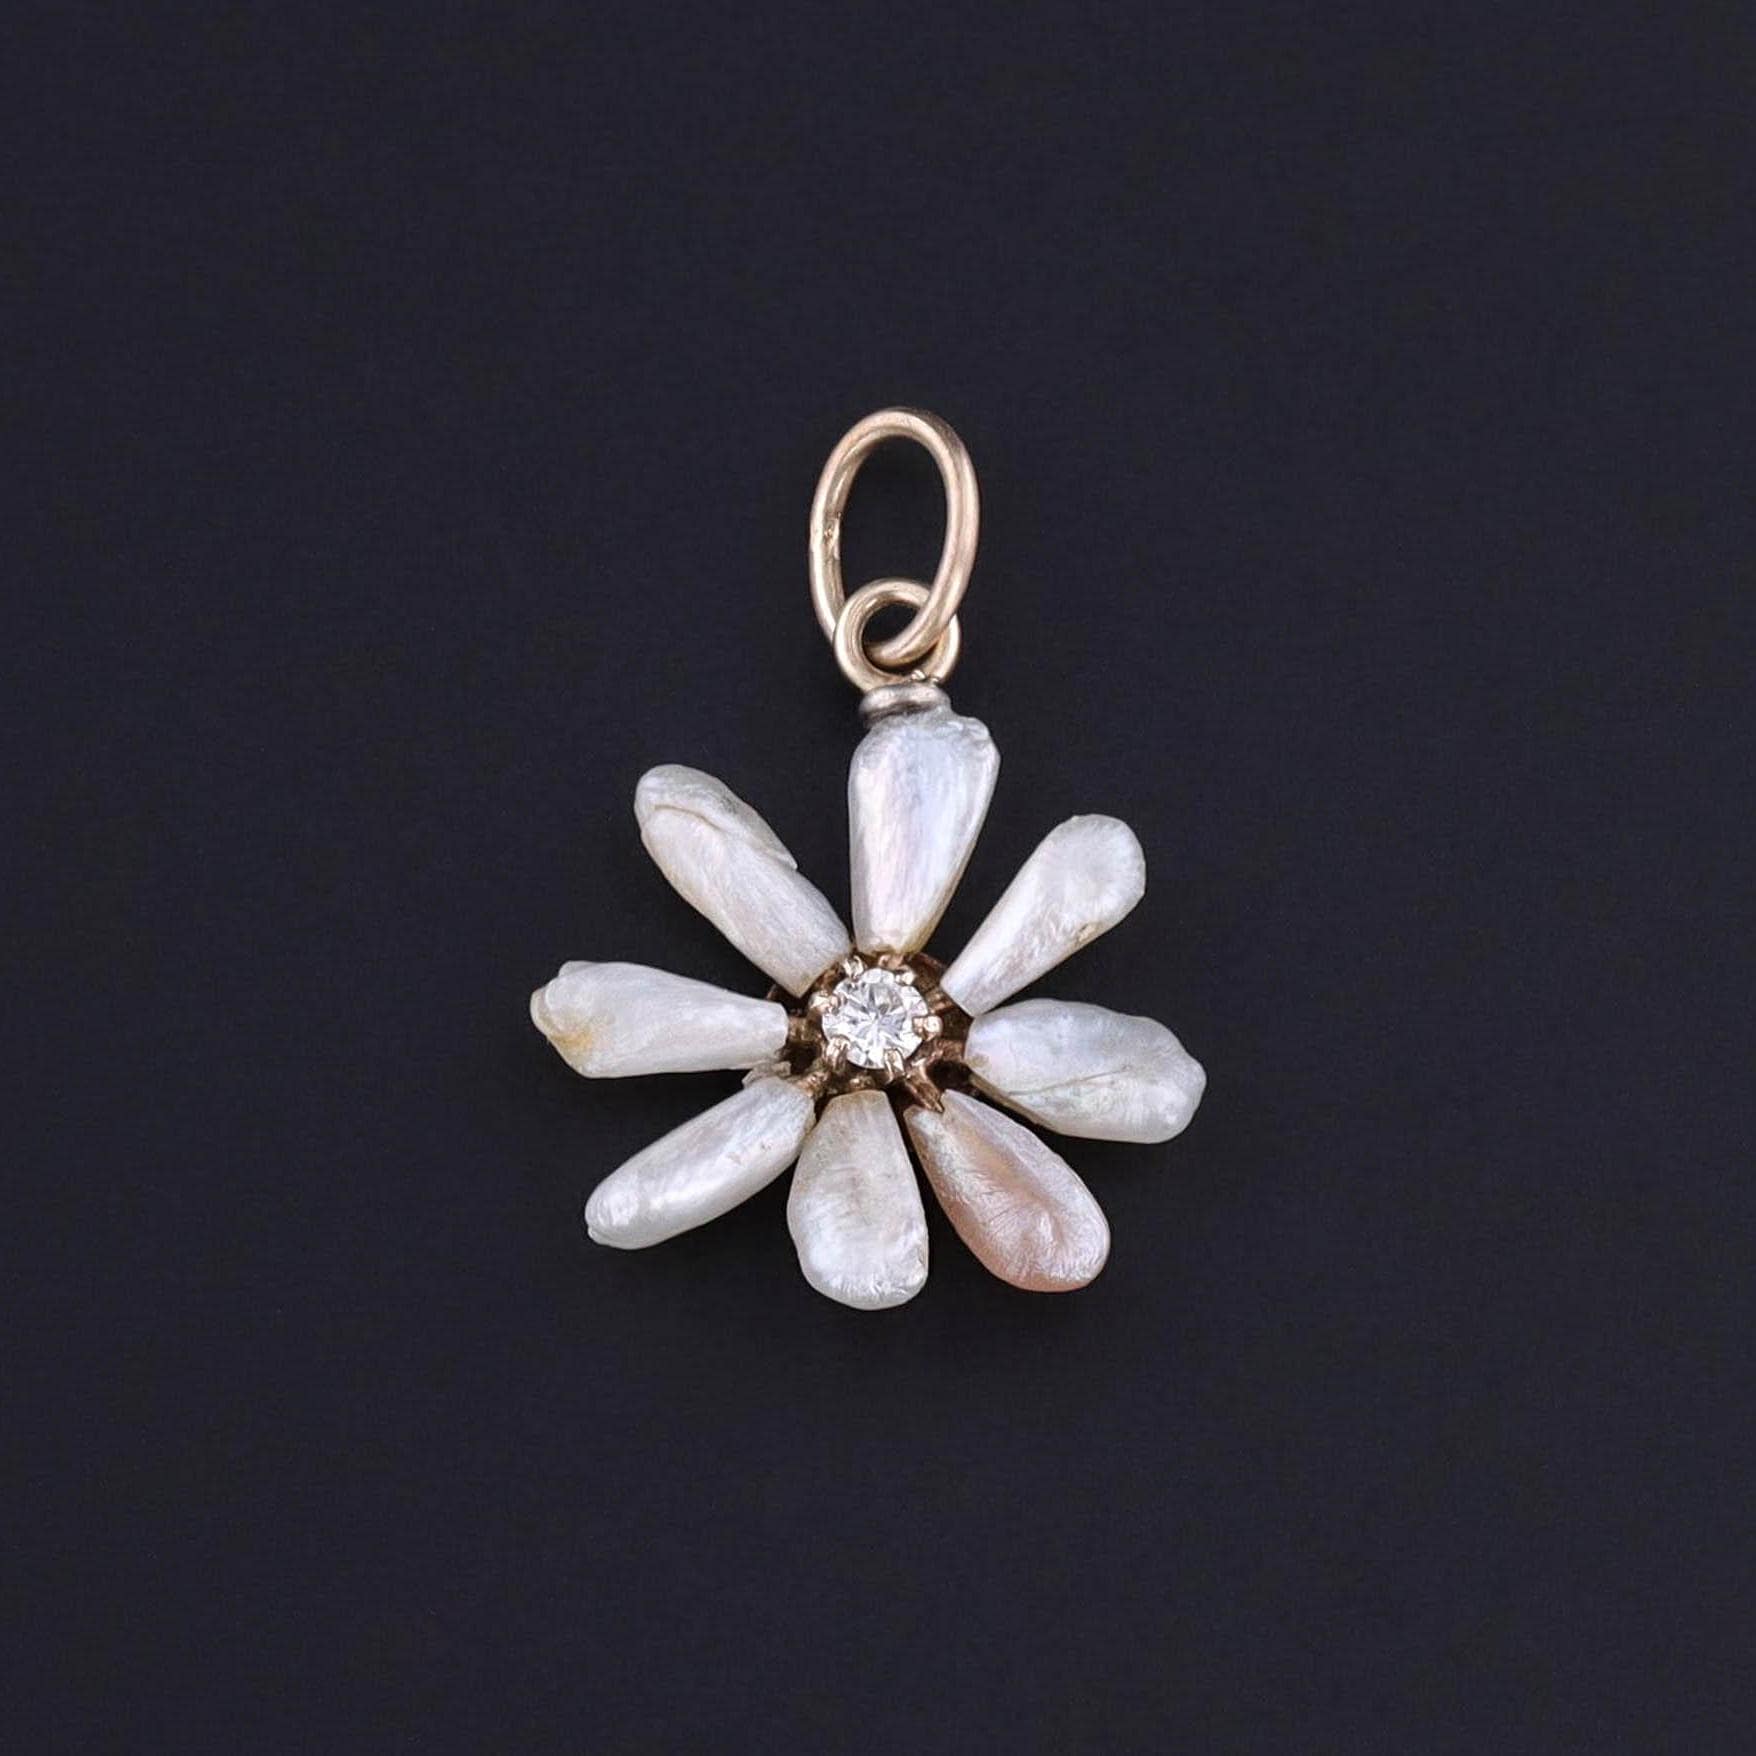 An antique pearl daisy charm of 14k gold. It was originally an antique stickpin with a diamond at its center. Perfect for any daisy lover, anyone named Daisy, or anyone with a love of flowers or antique jewelry.